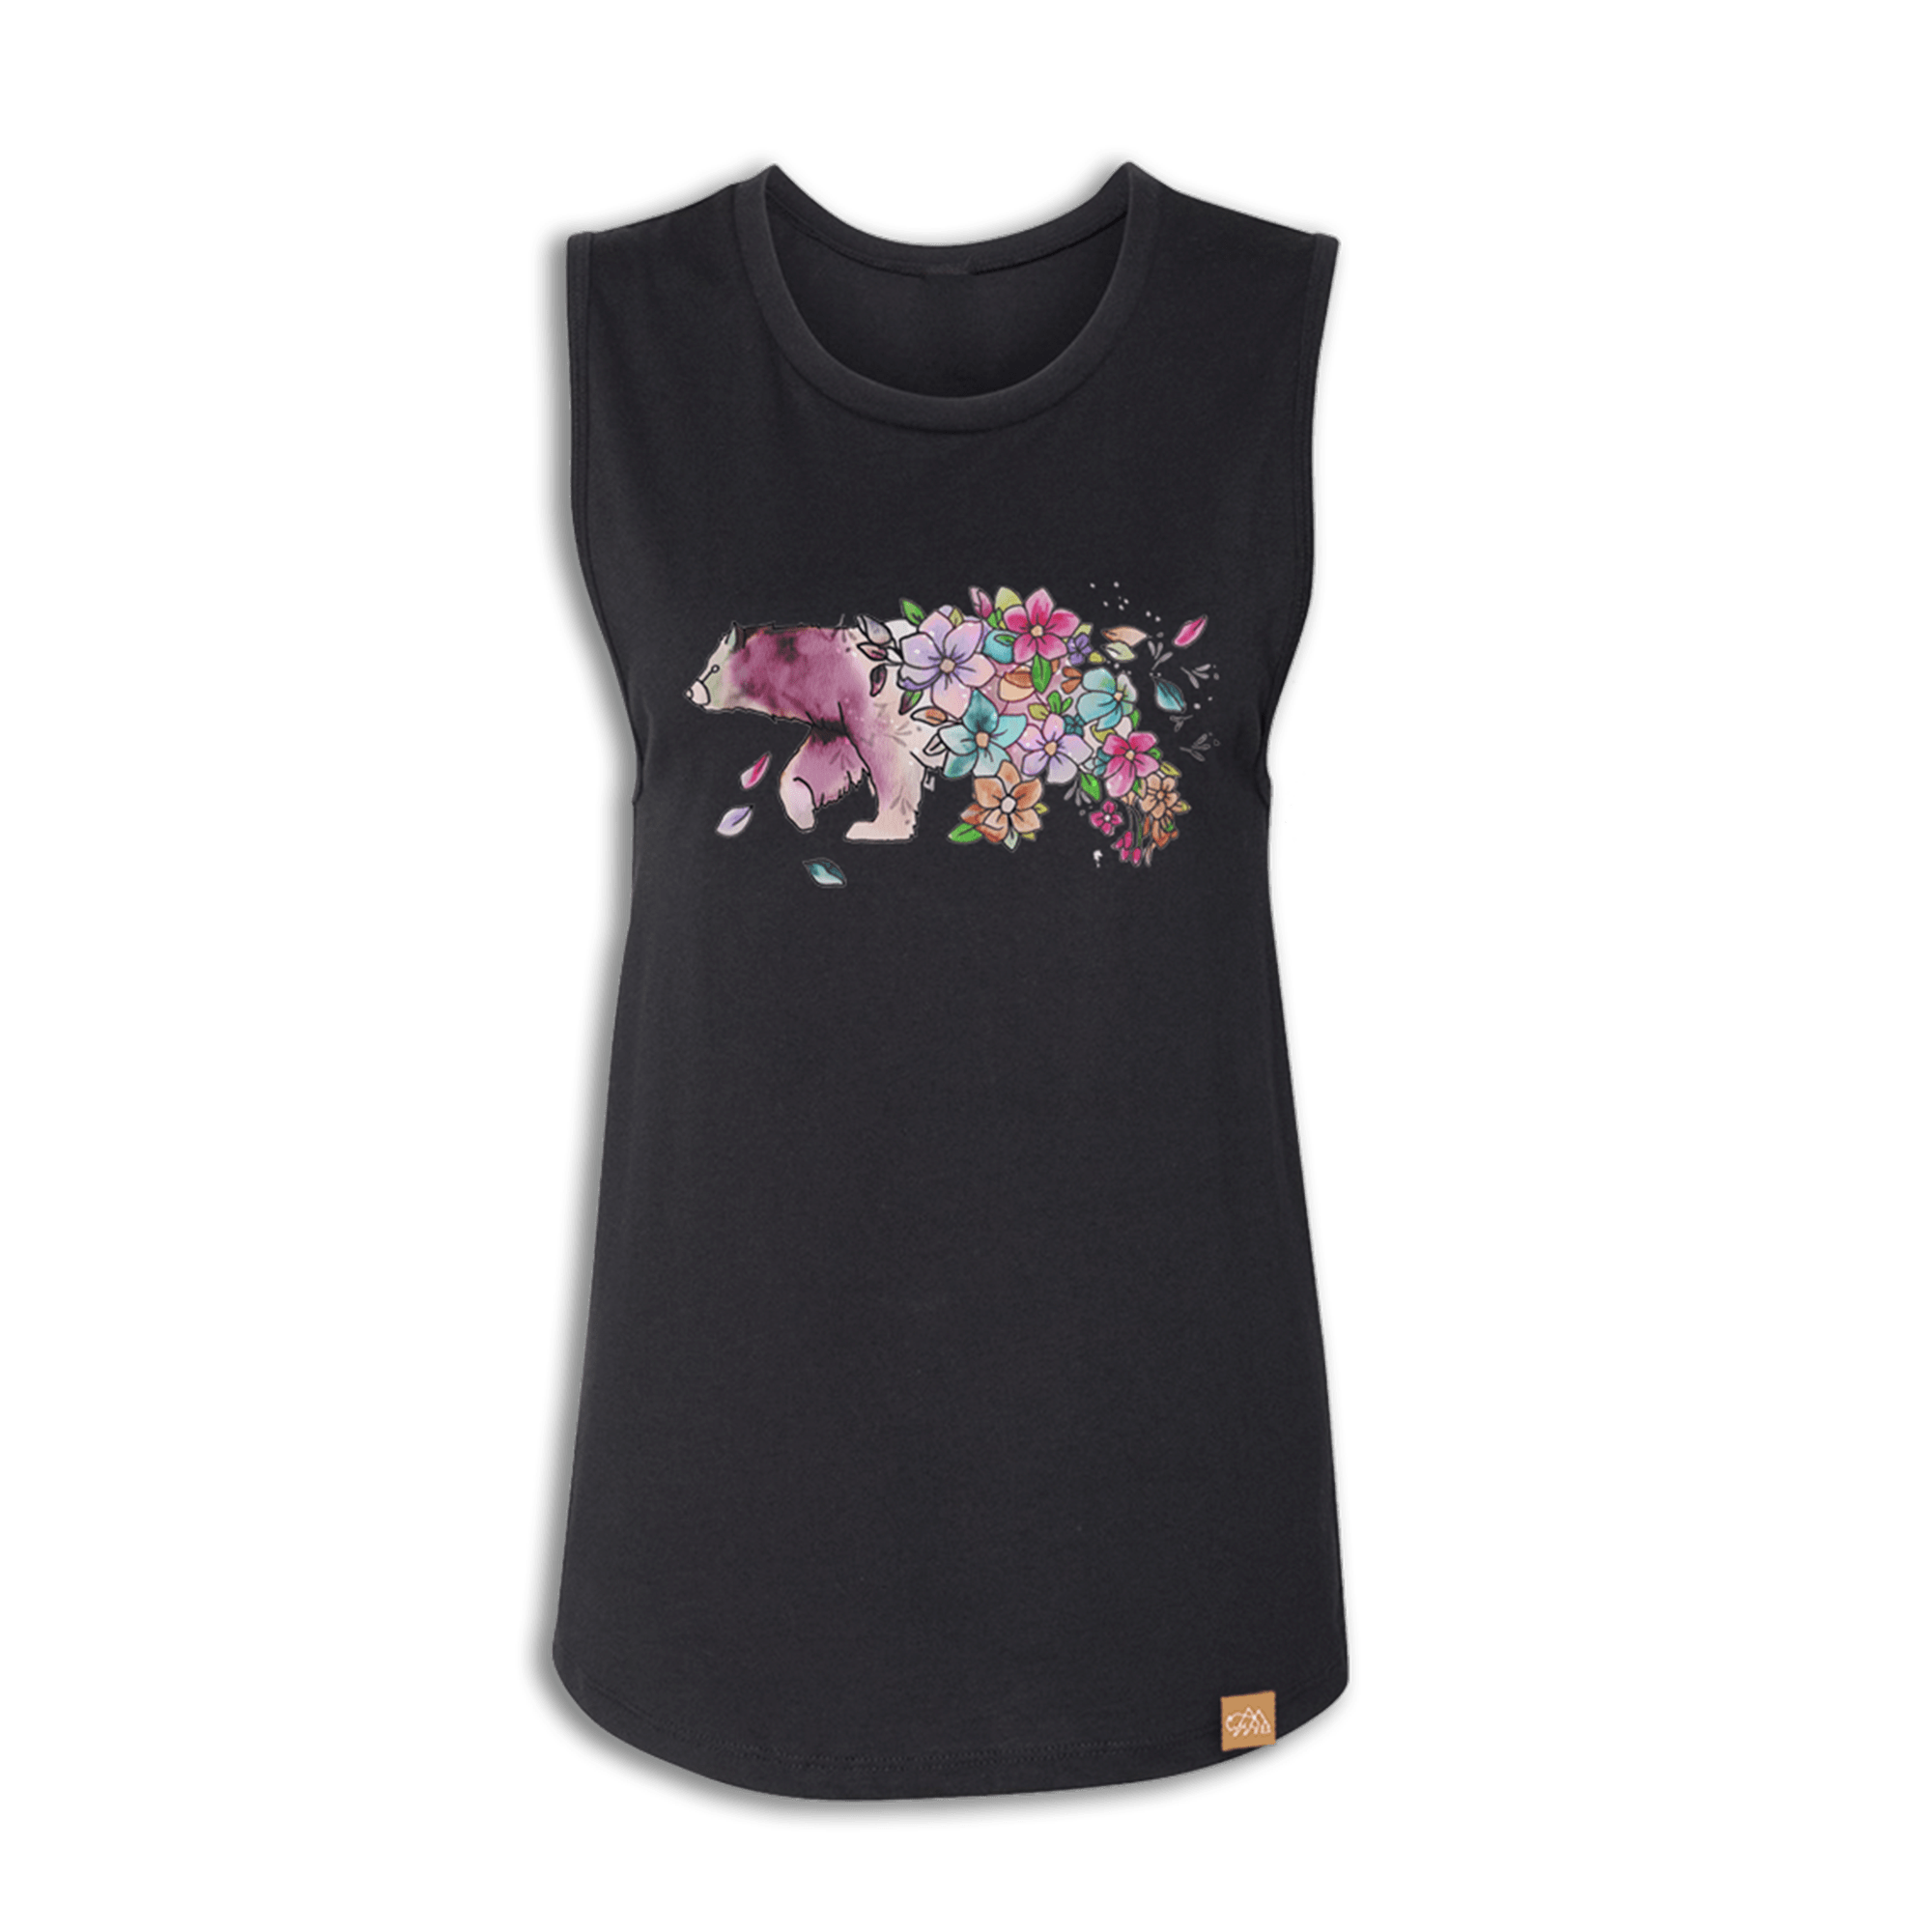 Filled With Love Women's Muscle Tank Top